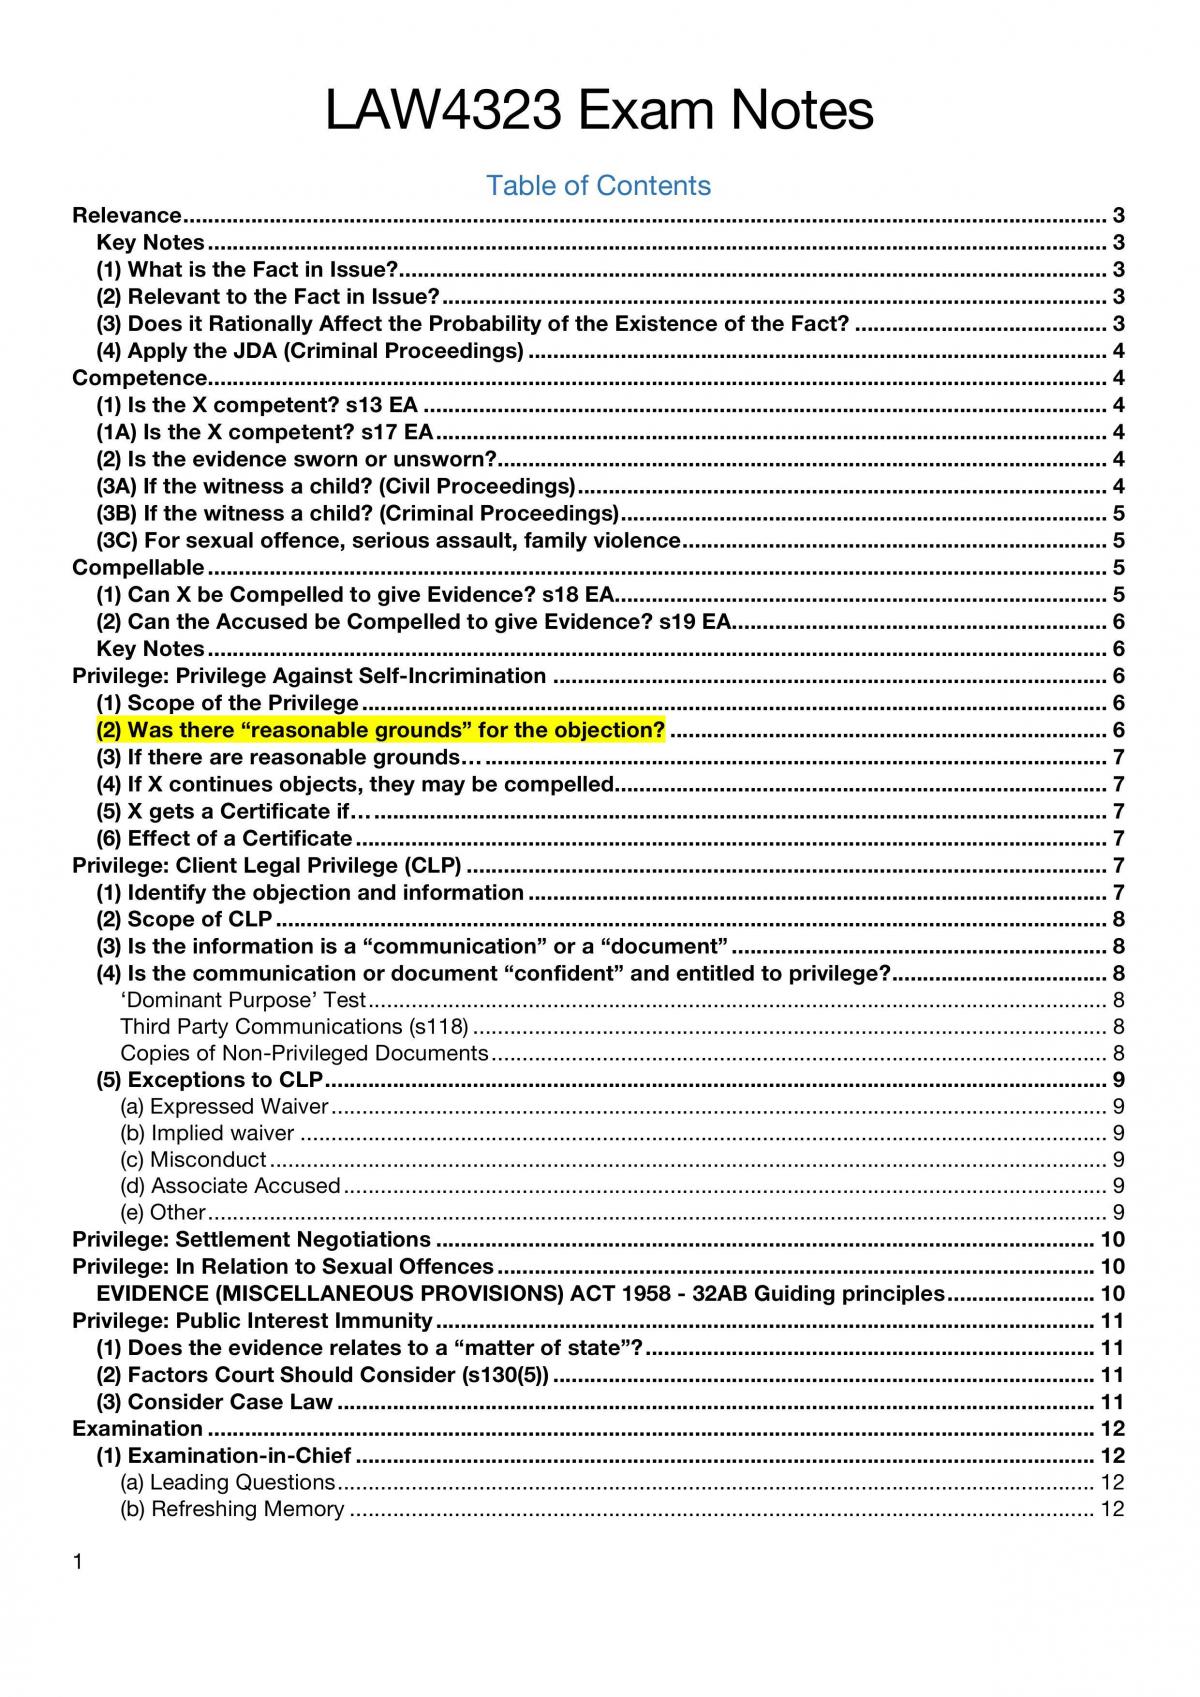 LAW4323 Evidence Exam Notes - Page 1